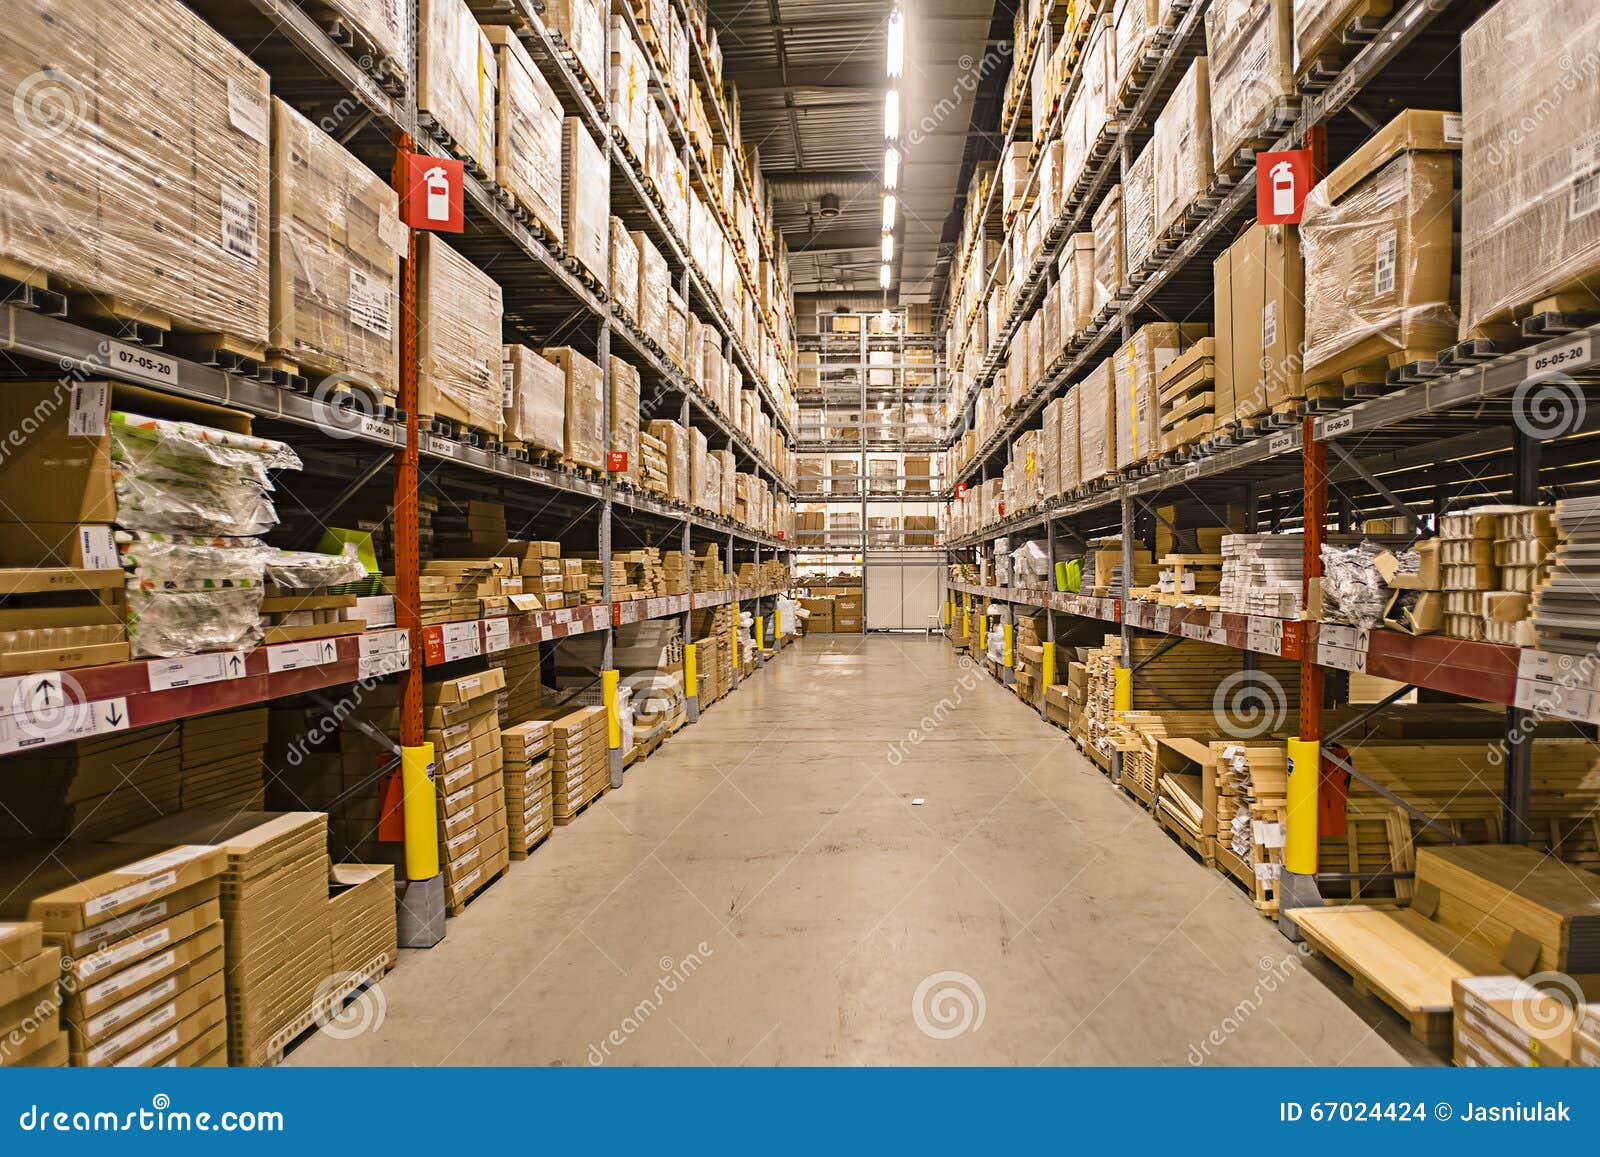 Boxes on rows of shelves. stock photo. Image of container - 67024424